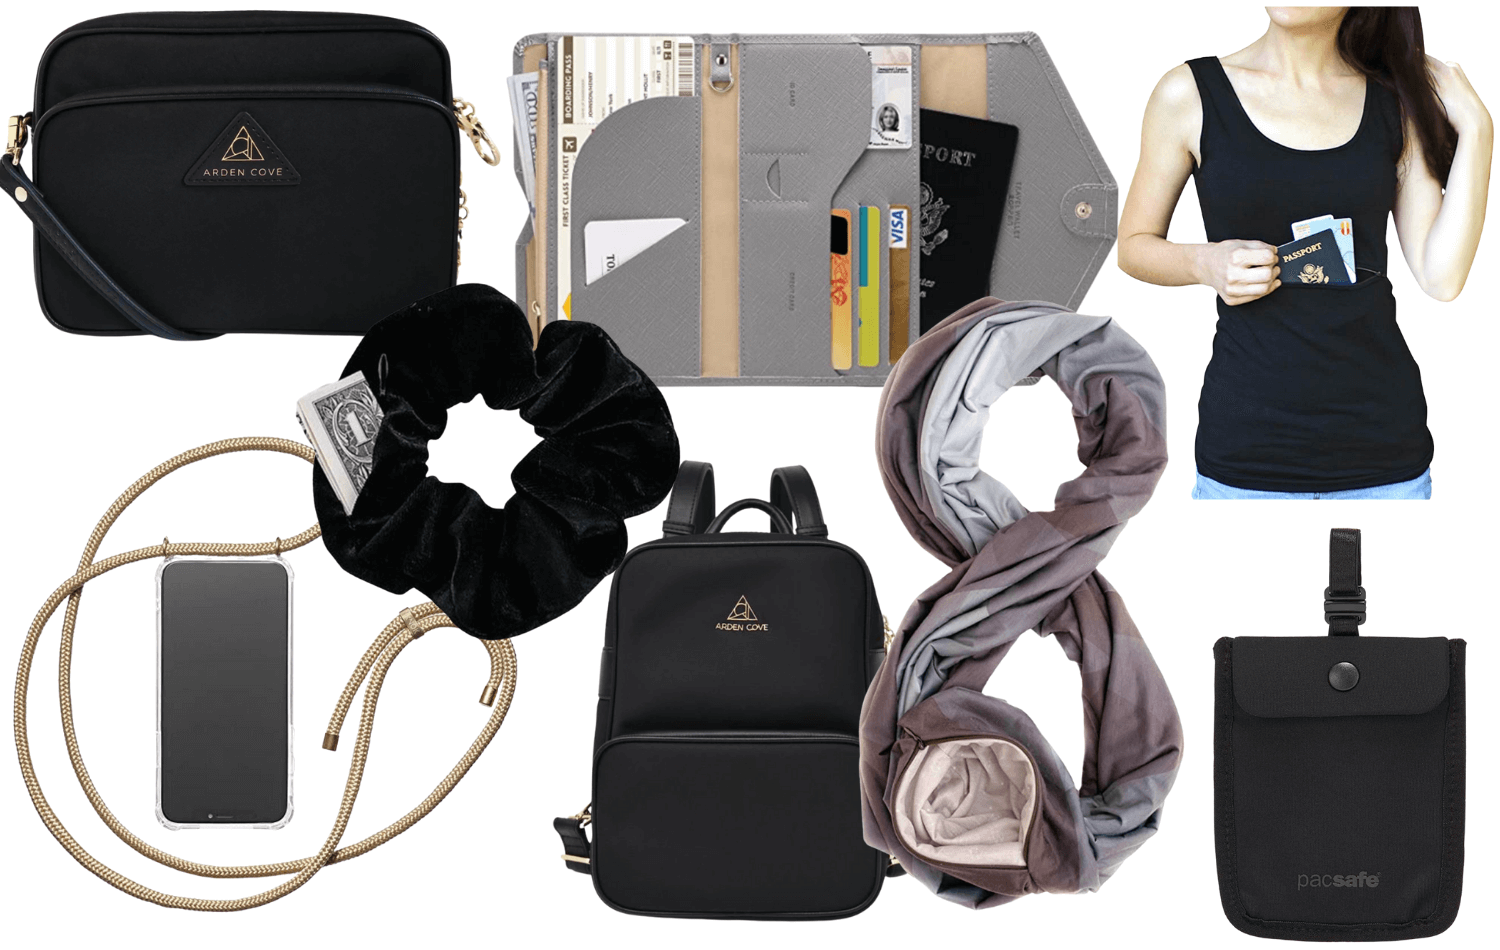 Travel Fashion Girl - From neck pouches to hidden pockets, there's